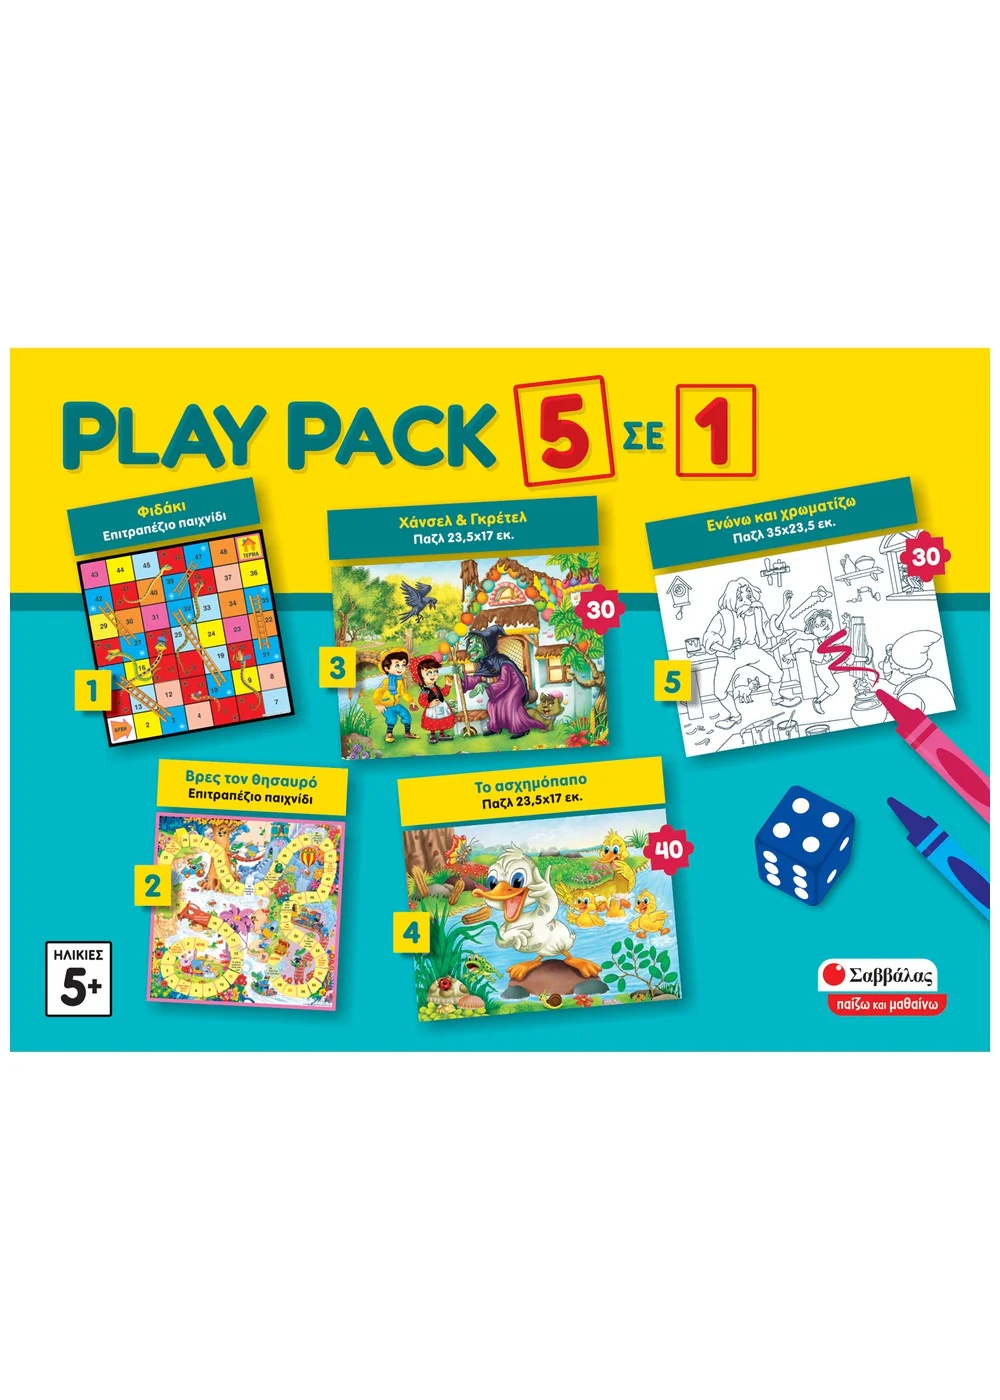  PLAY PACK 5 ΣΕ 1